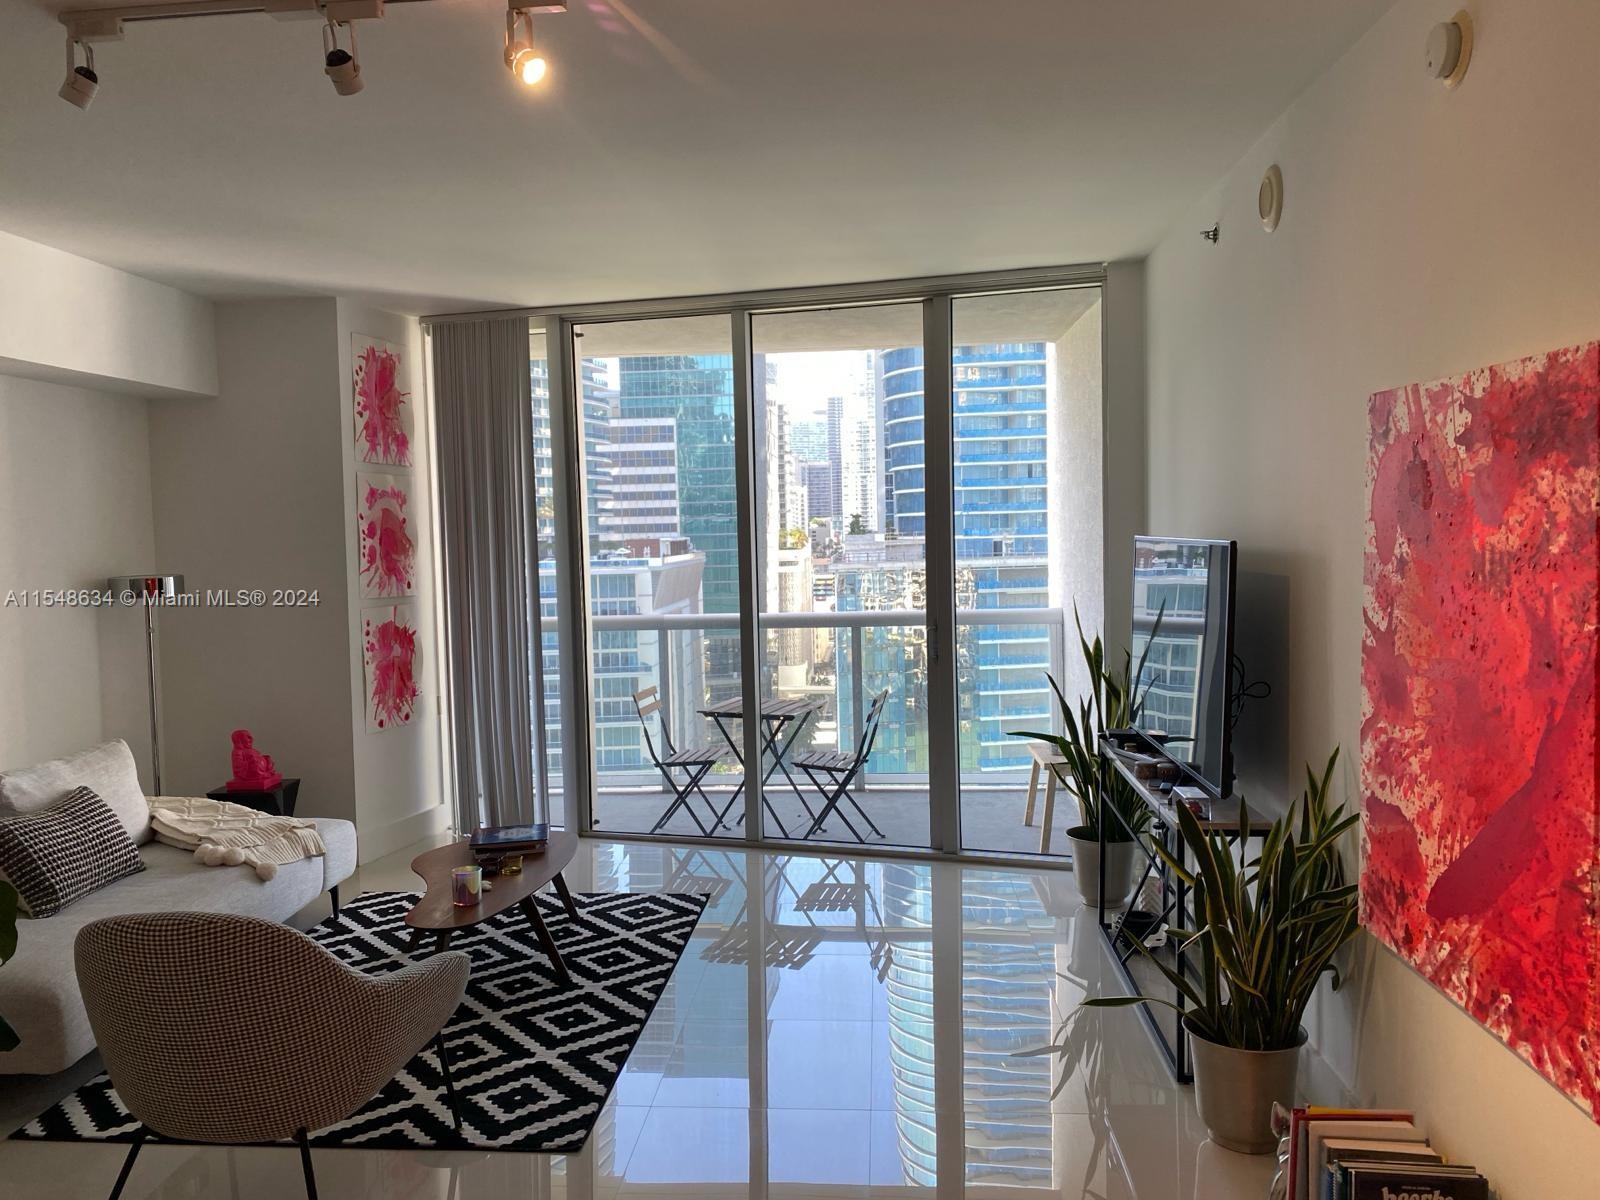 Gorgeous studio with amazing water and city views. It has incredible amenities such as 2 pools, jacuzzi, fitness center, spa, movie theater, party room, restaurant, etc. Near to everywhere you want to be.
Call listing agent for showings 24 hours in advance required. Rented until May 20, 2024.